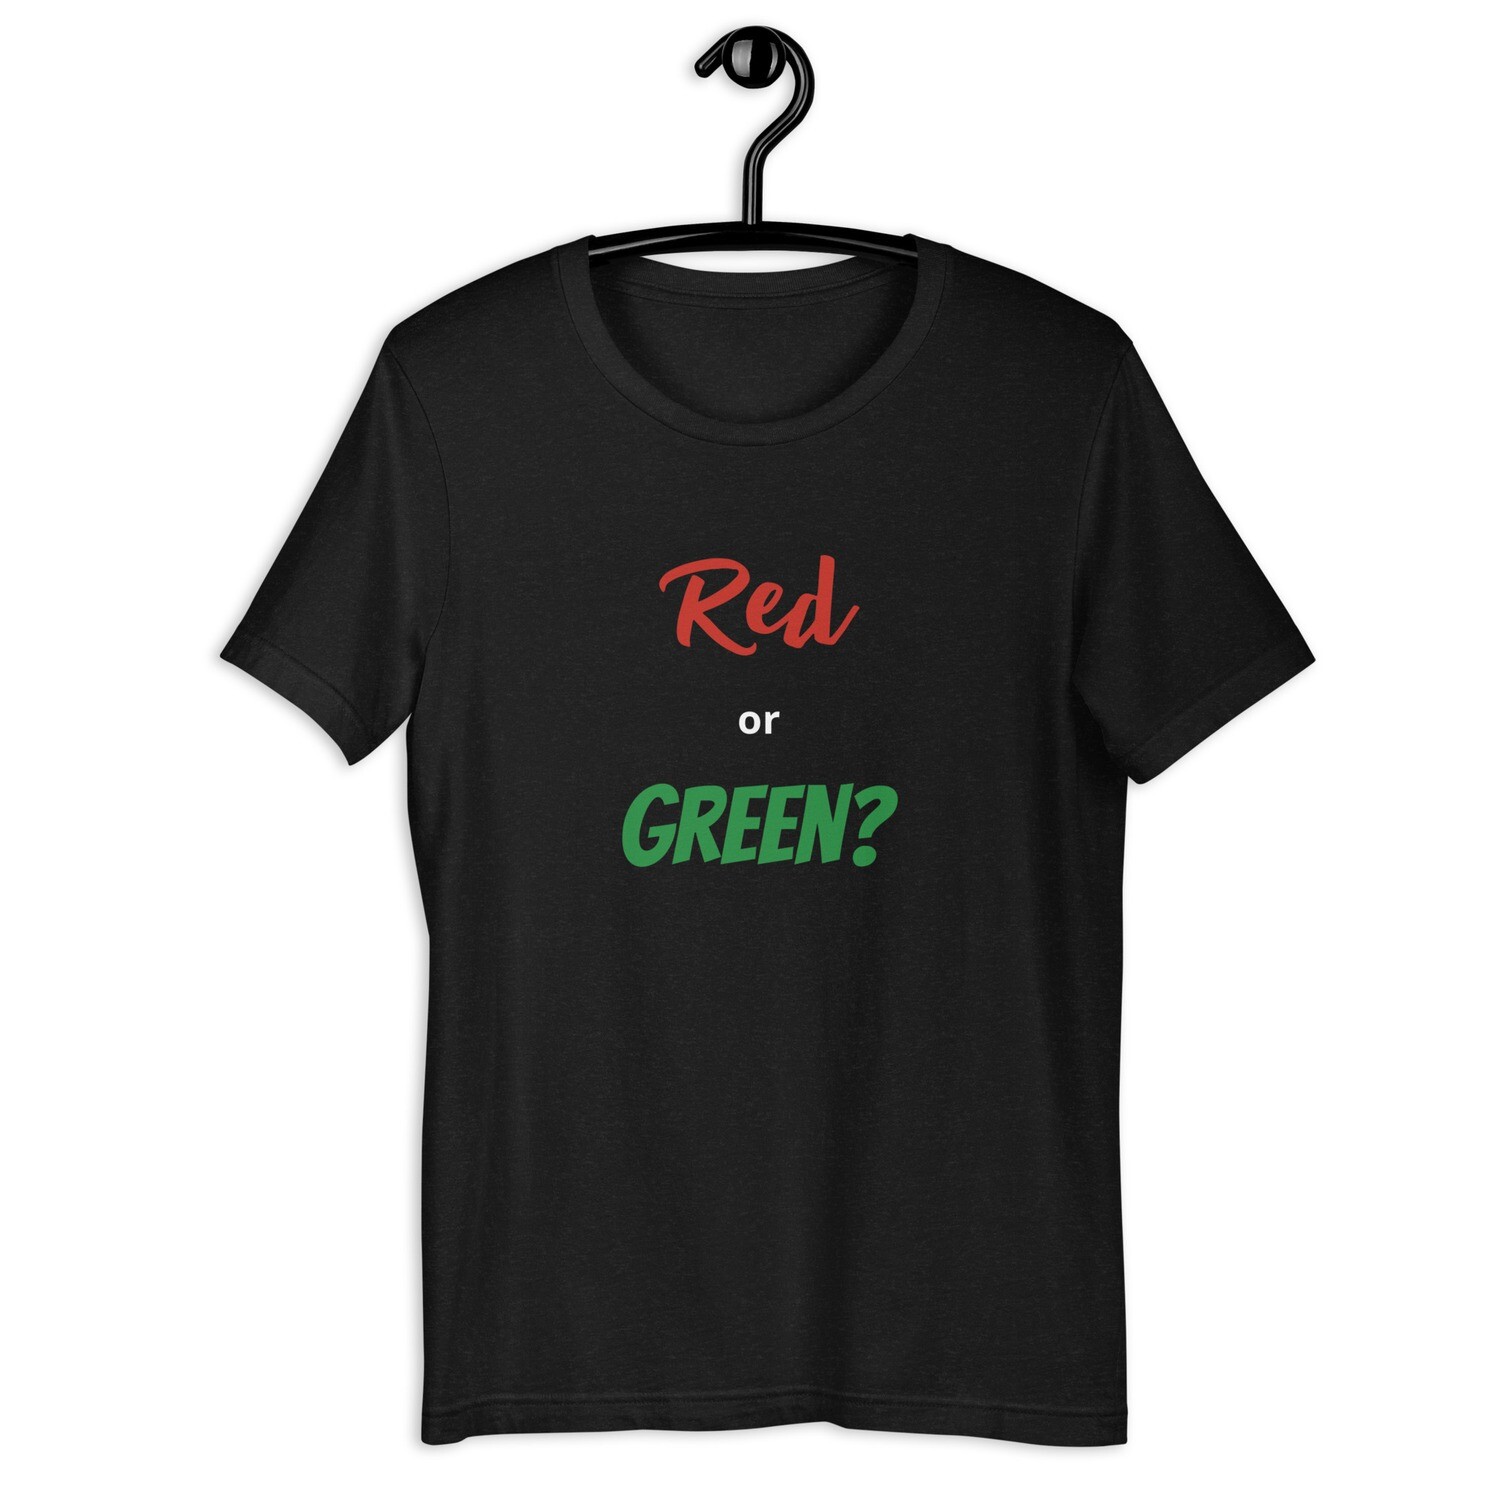 " Red or Green" Unisex t-shirt